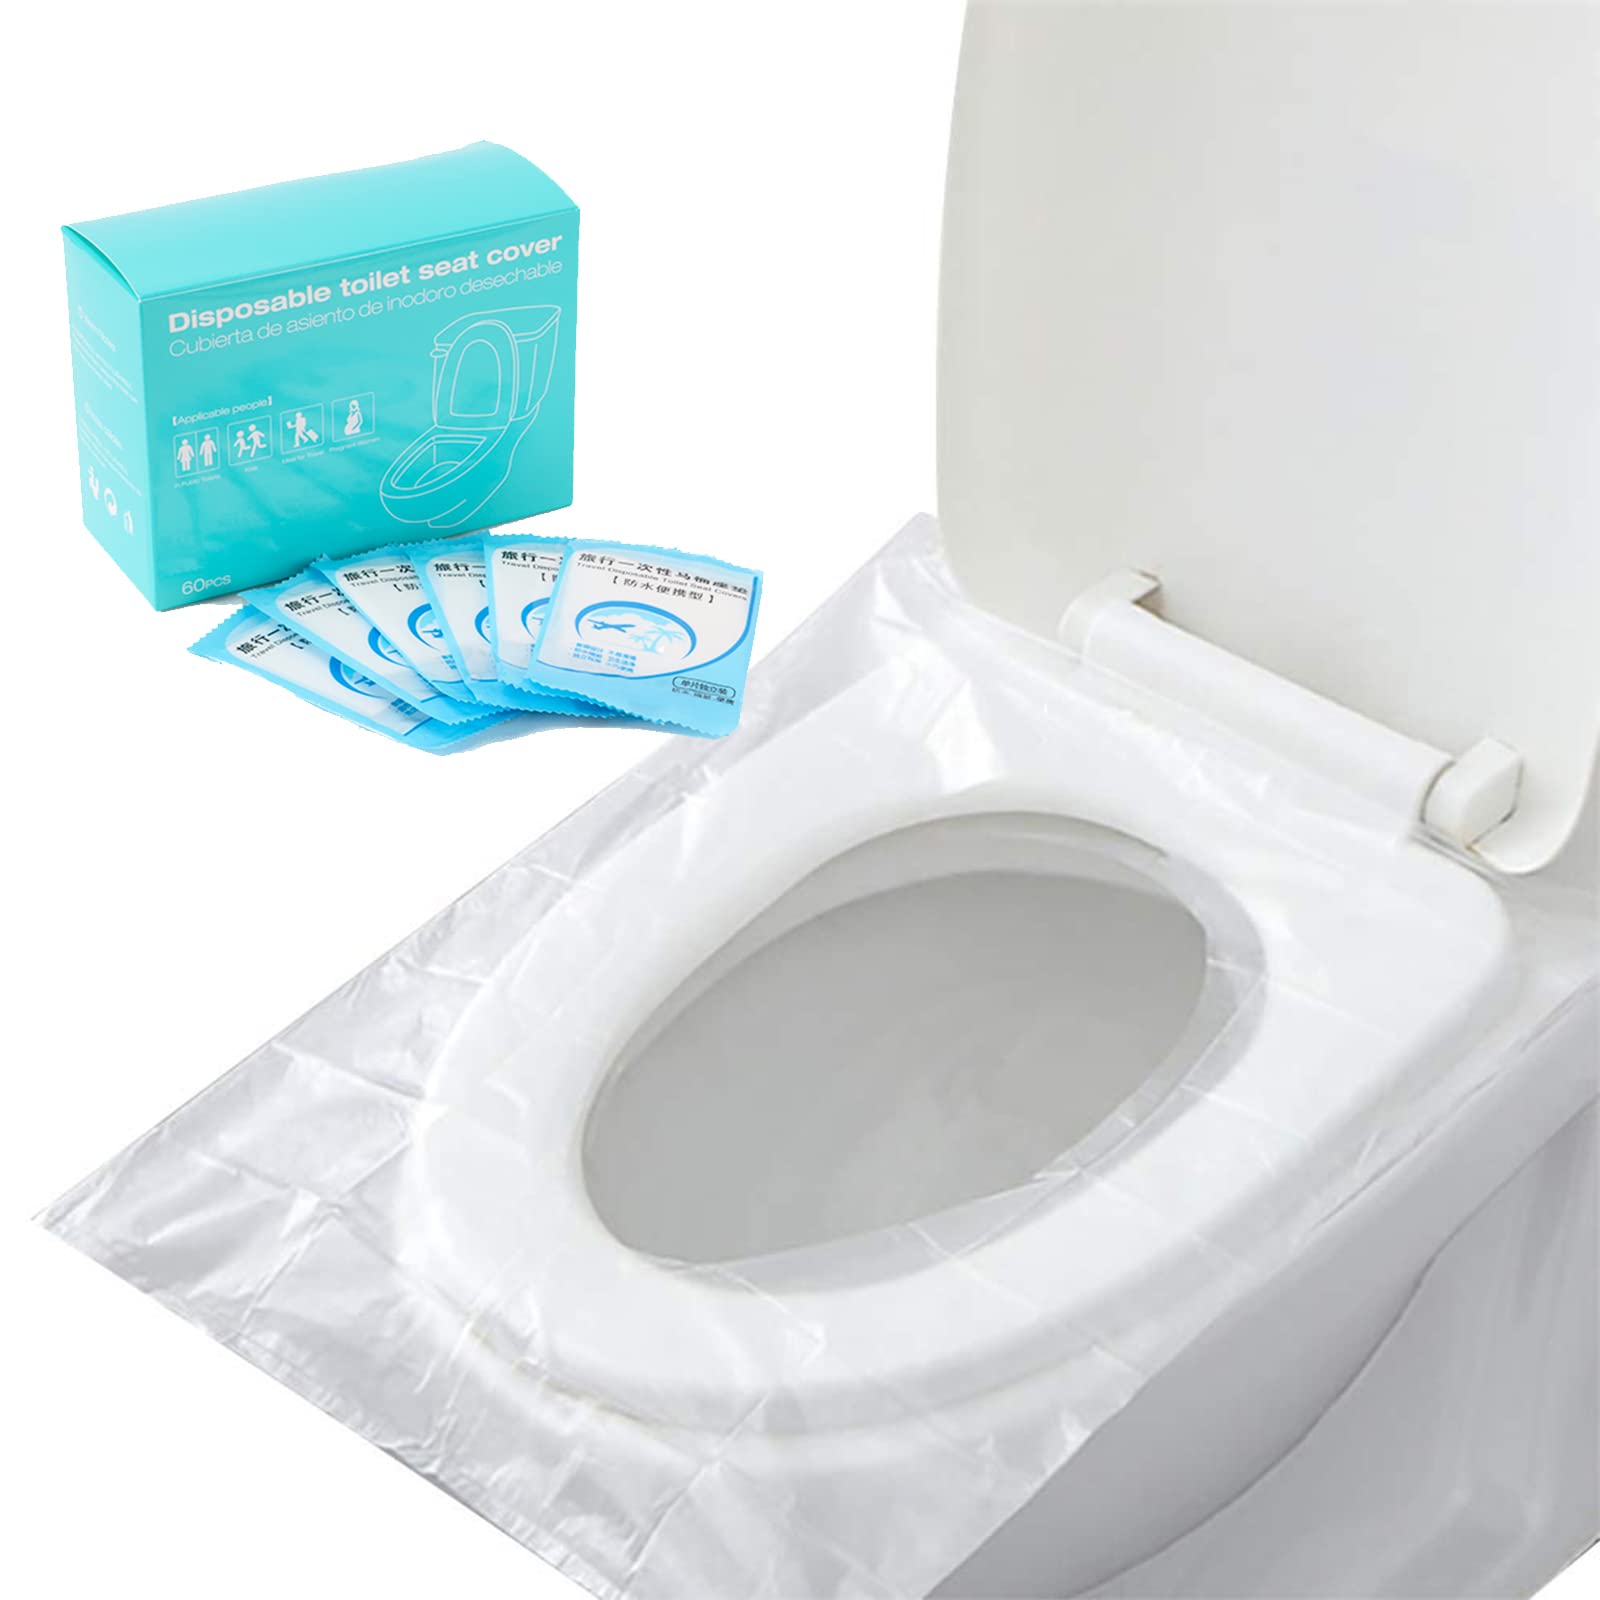 Toilet Seat Covers Disposable 60 pack for Travel Toilet Seat Cover